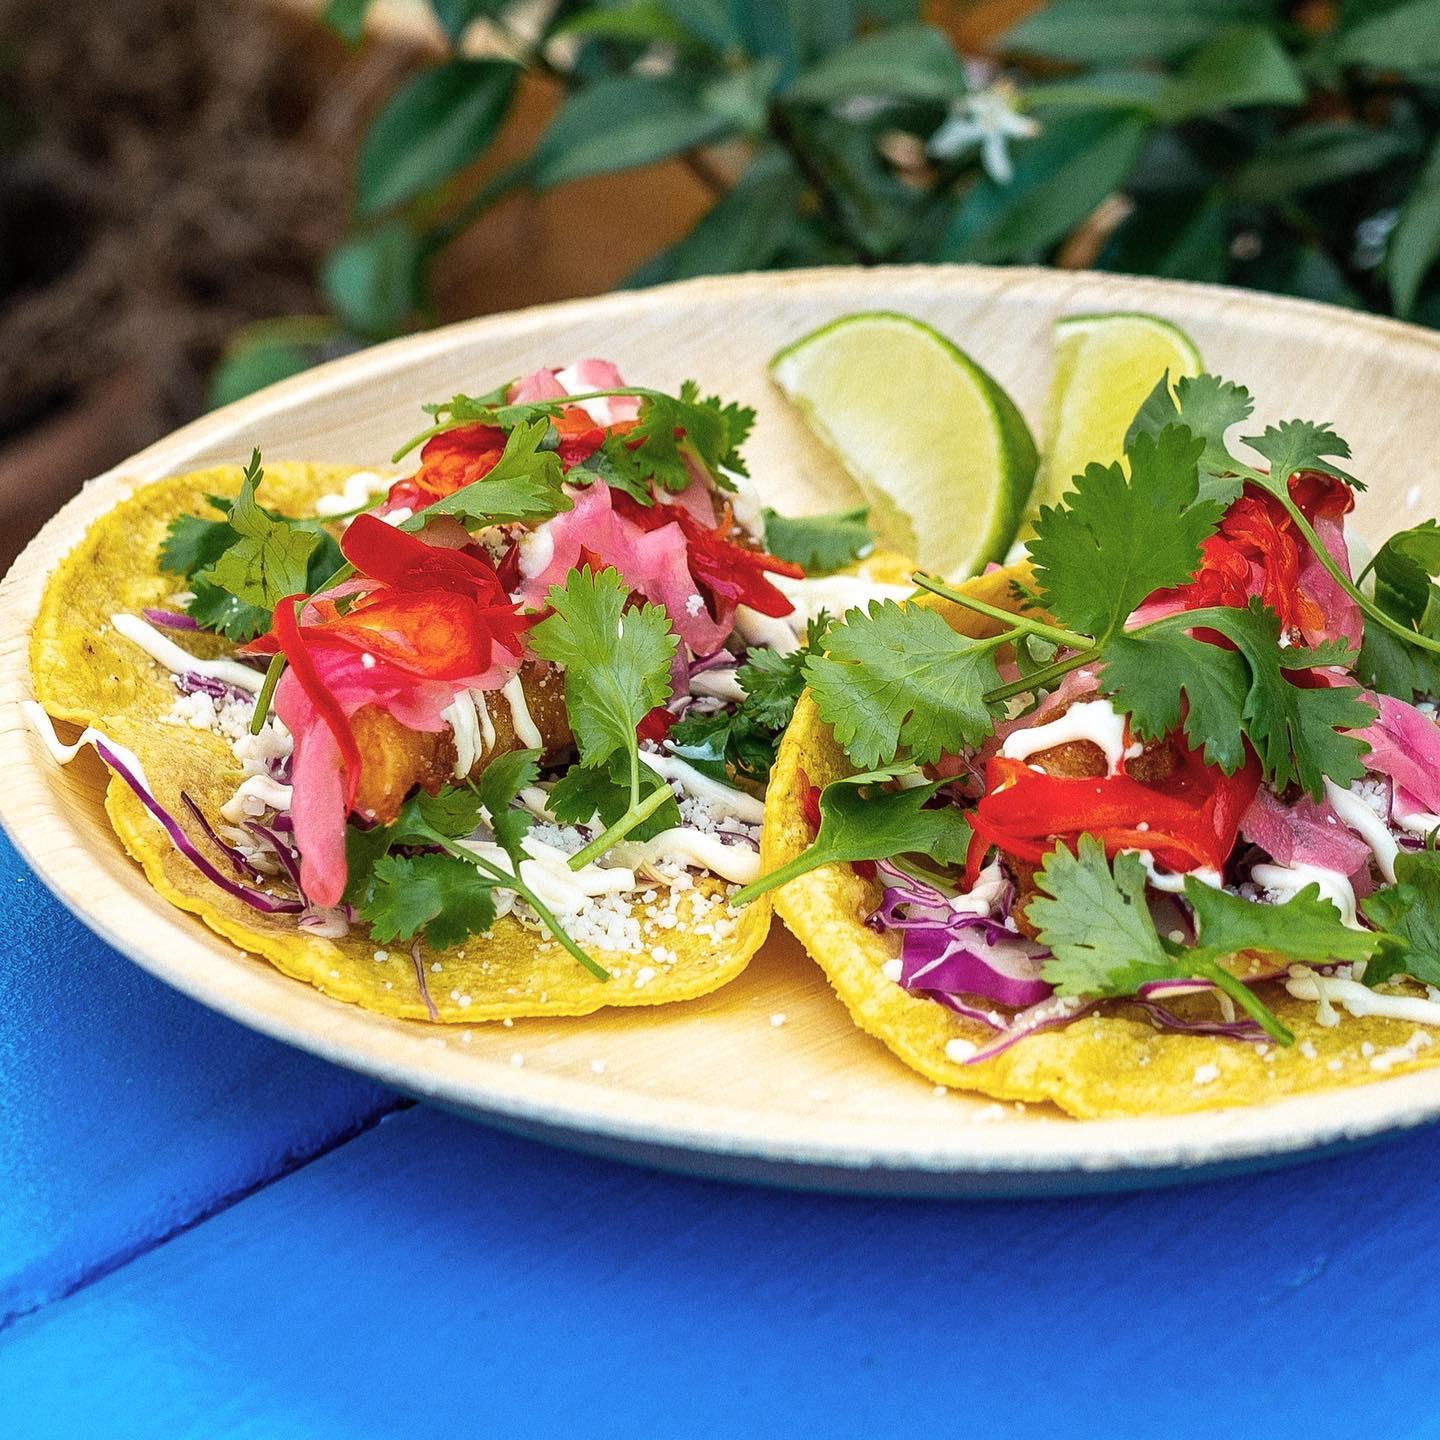 You’ll Love The Fish Tacos at This Humble Little Oregon Fish Market